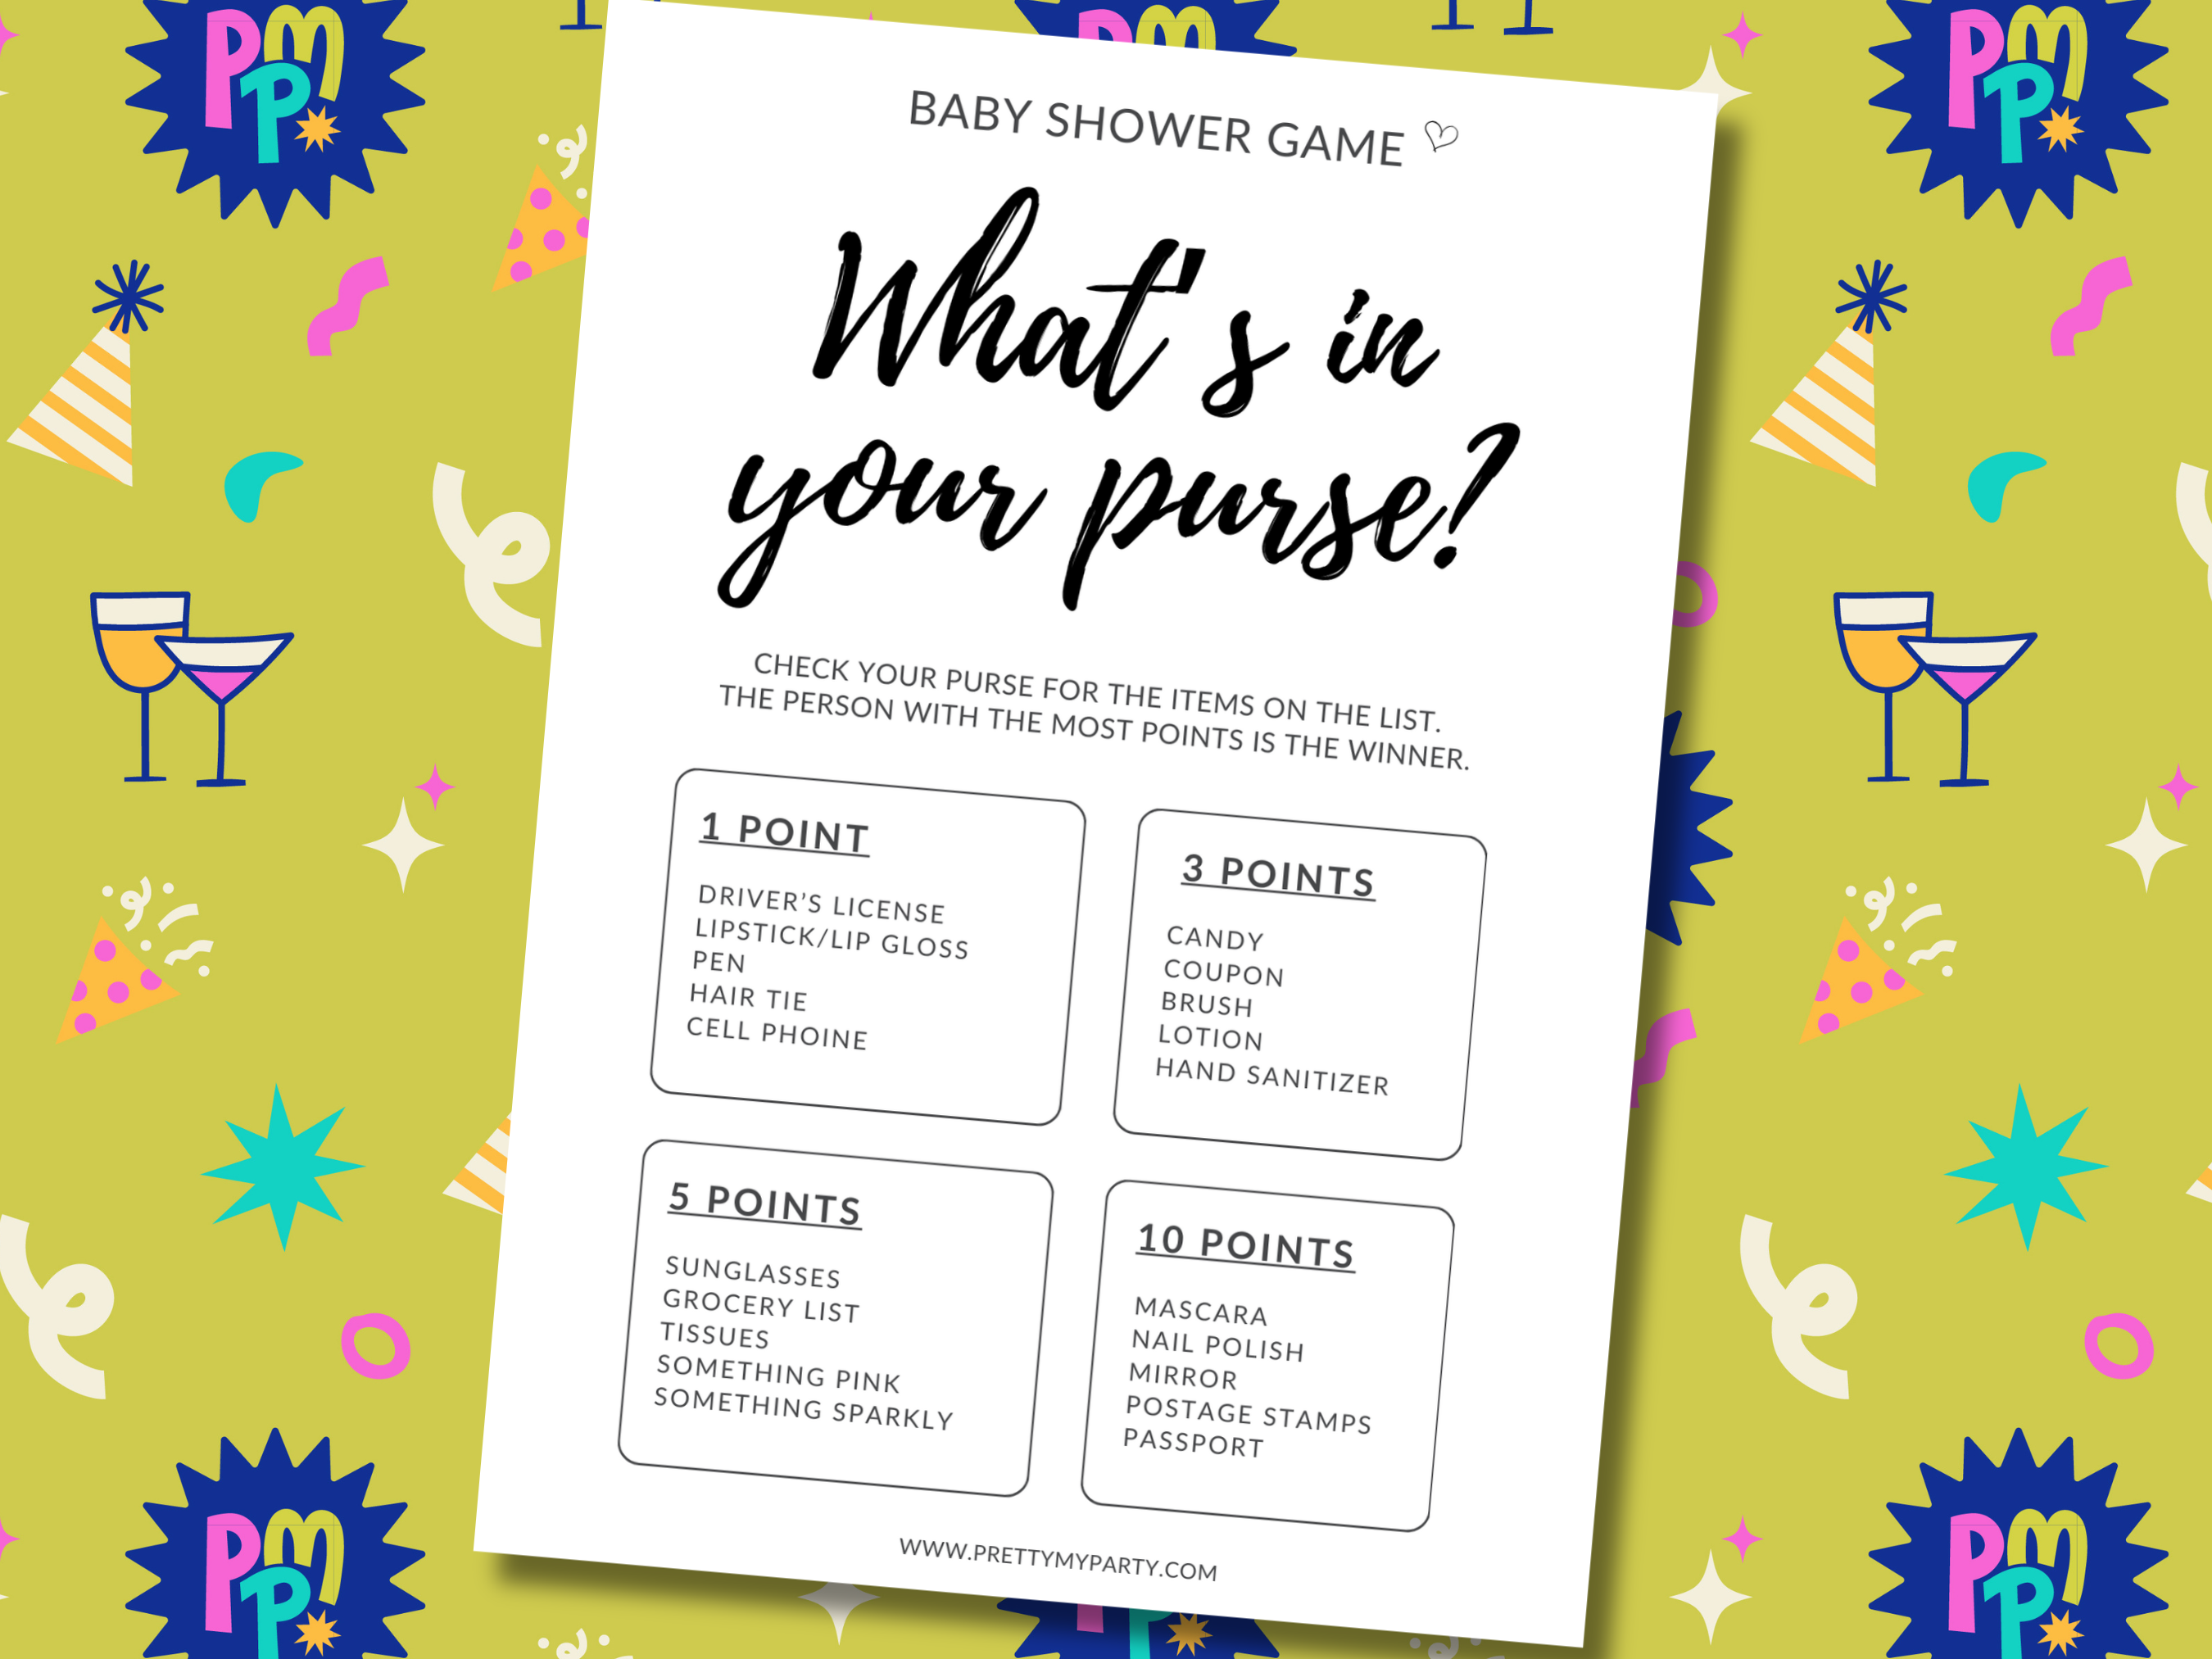 Easy to play and free printable baby shower games